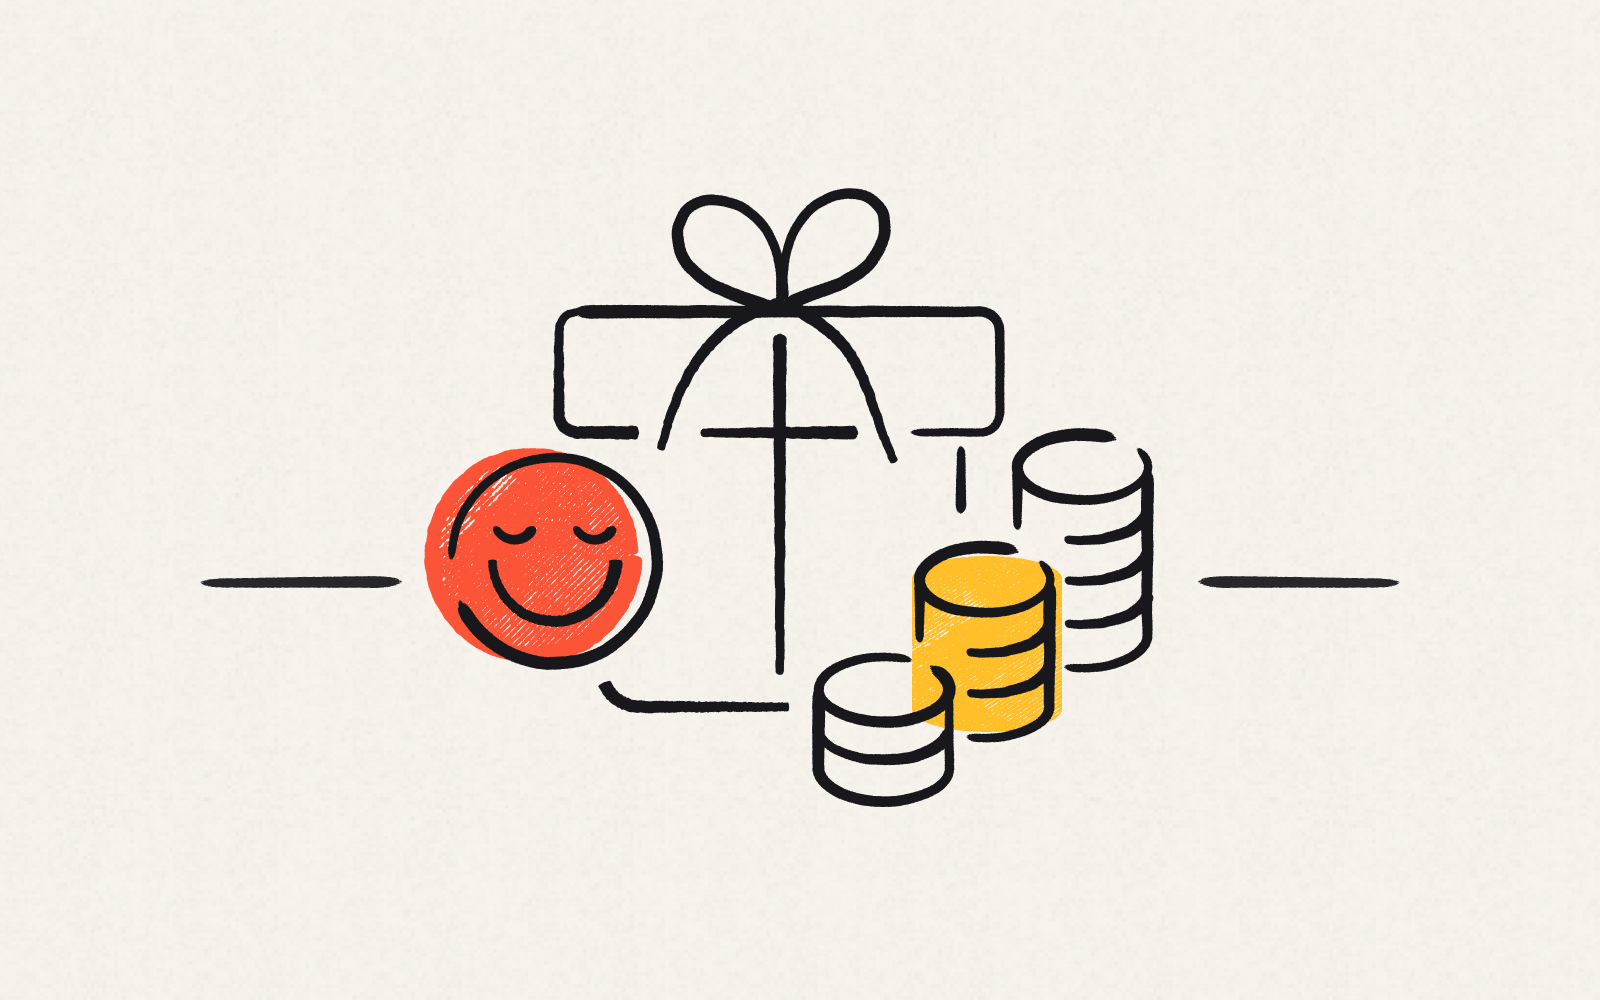 A gift surrounded by coins and a smiley face.